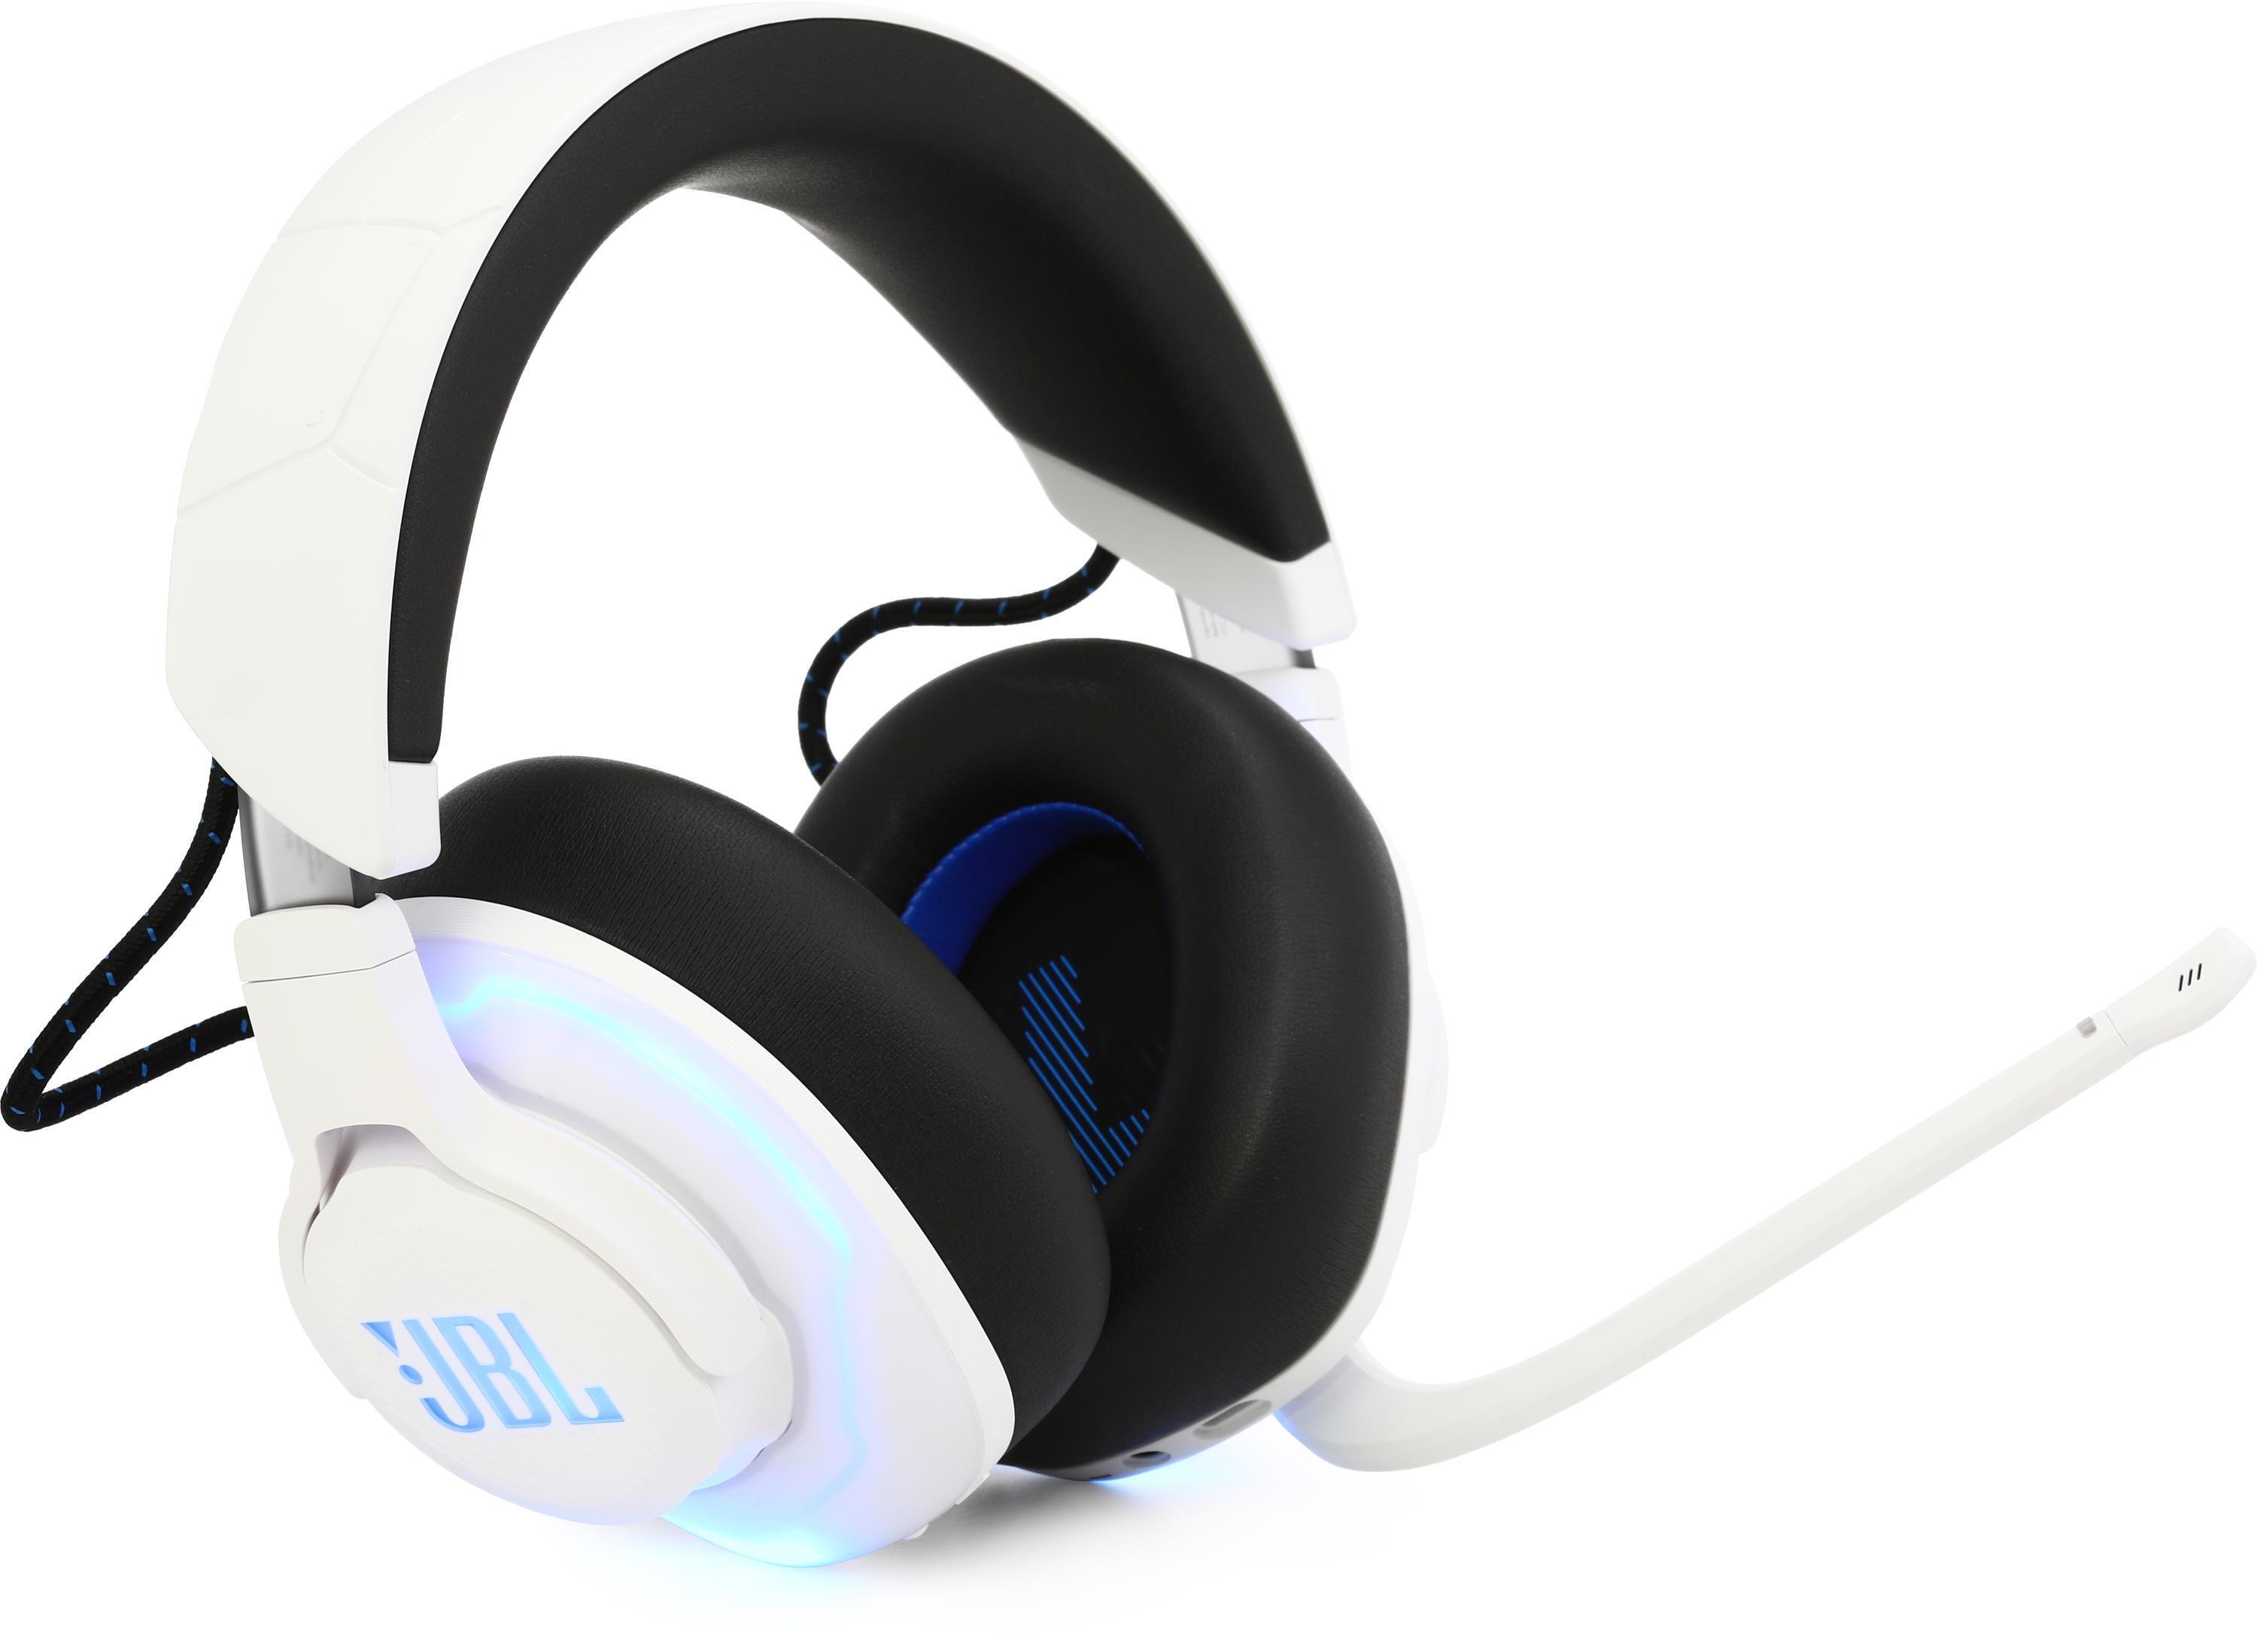 JBL Quantum 910P - Headset - full size - Bluetooth / 2.4 GHz radio  frequency - wireless, wired - active noise canceling - white